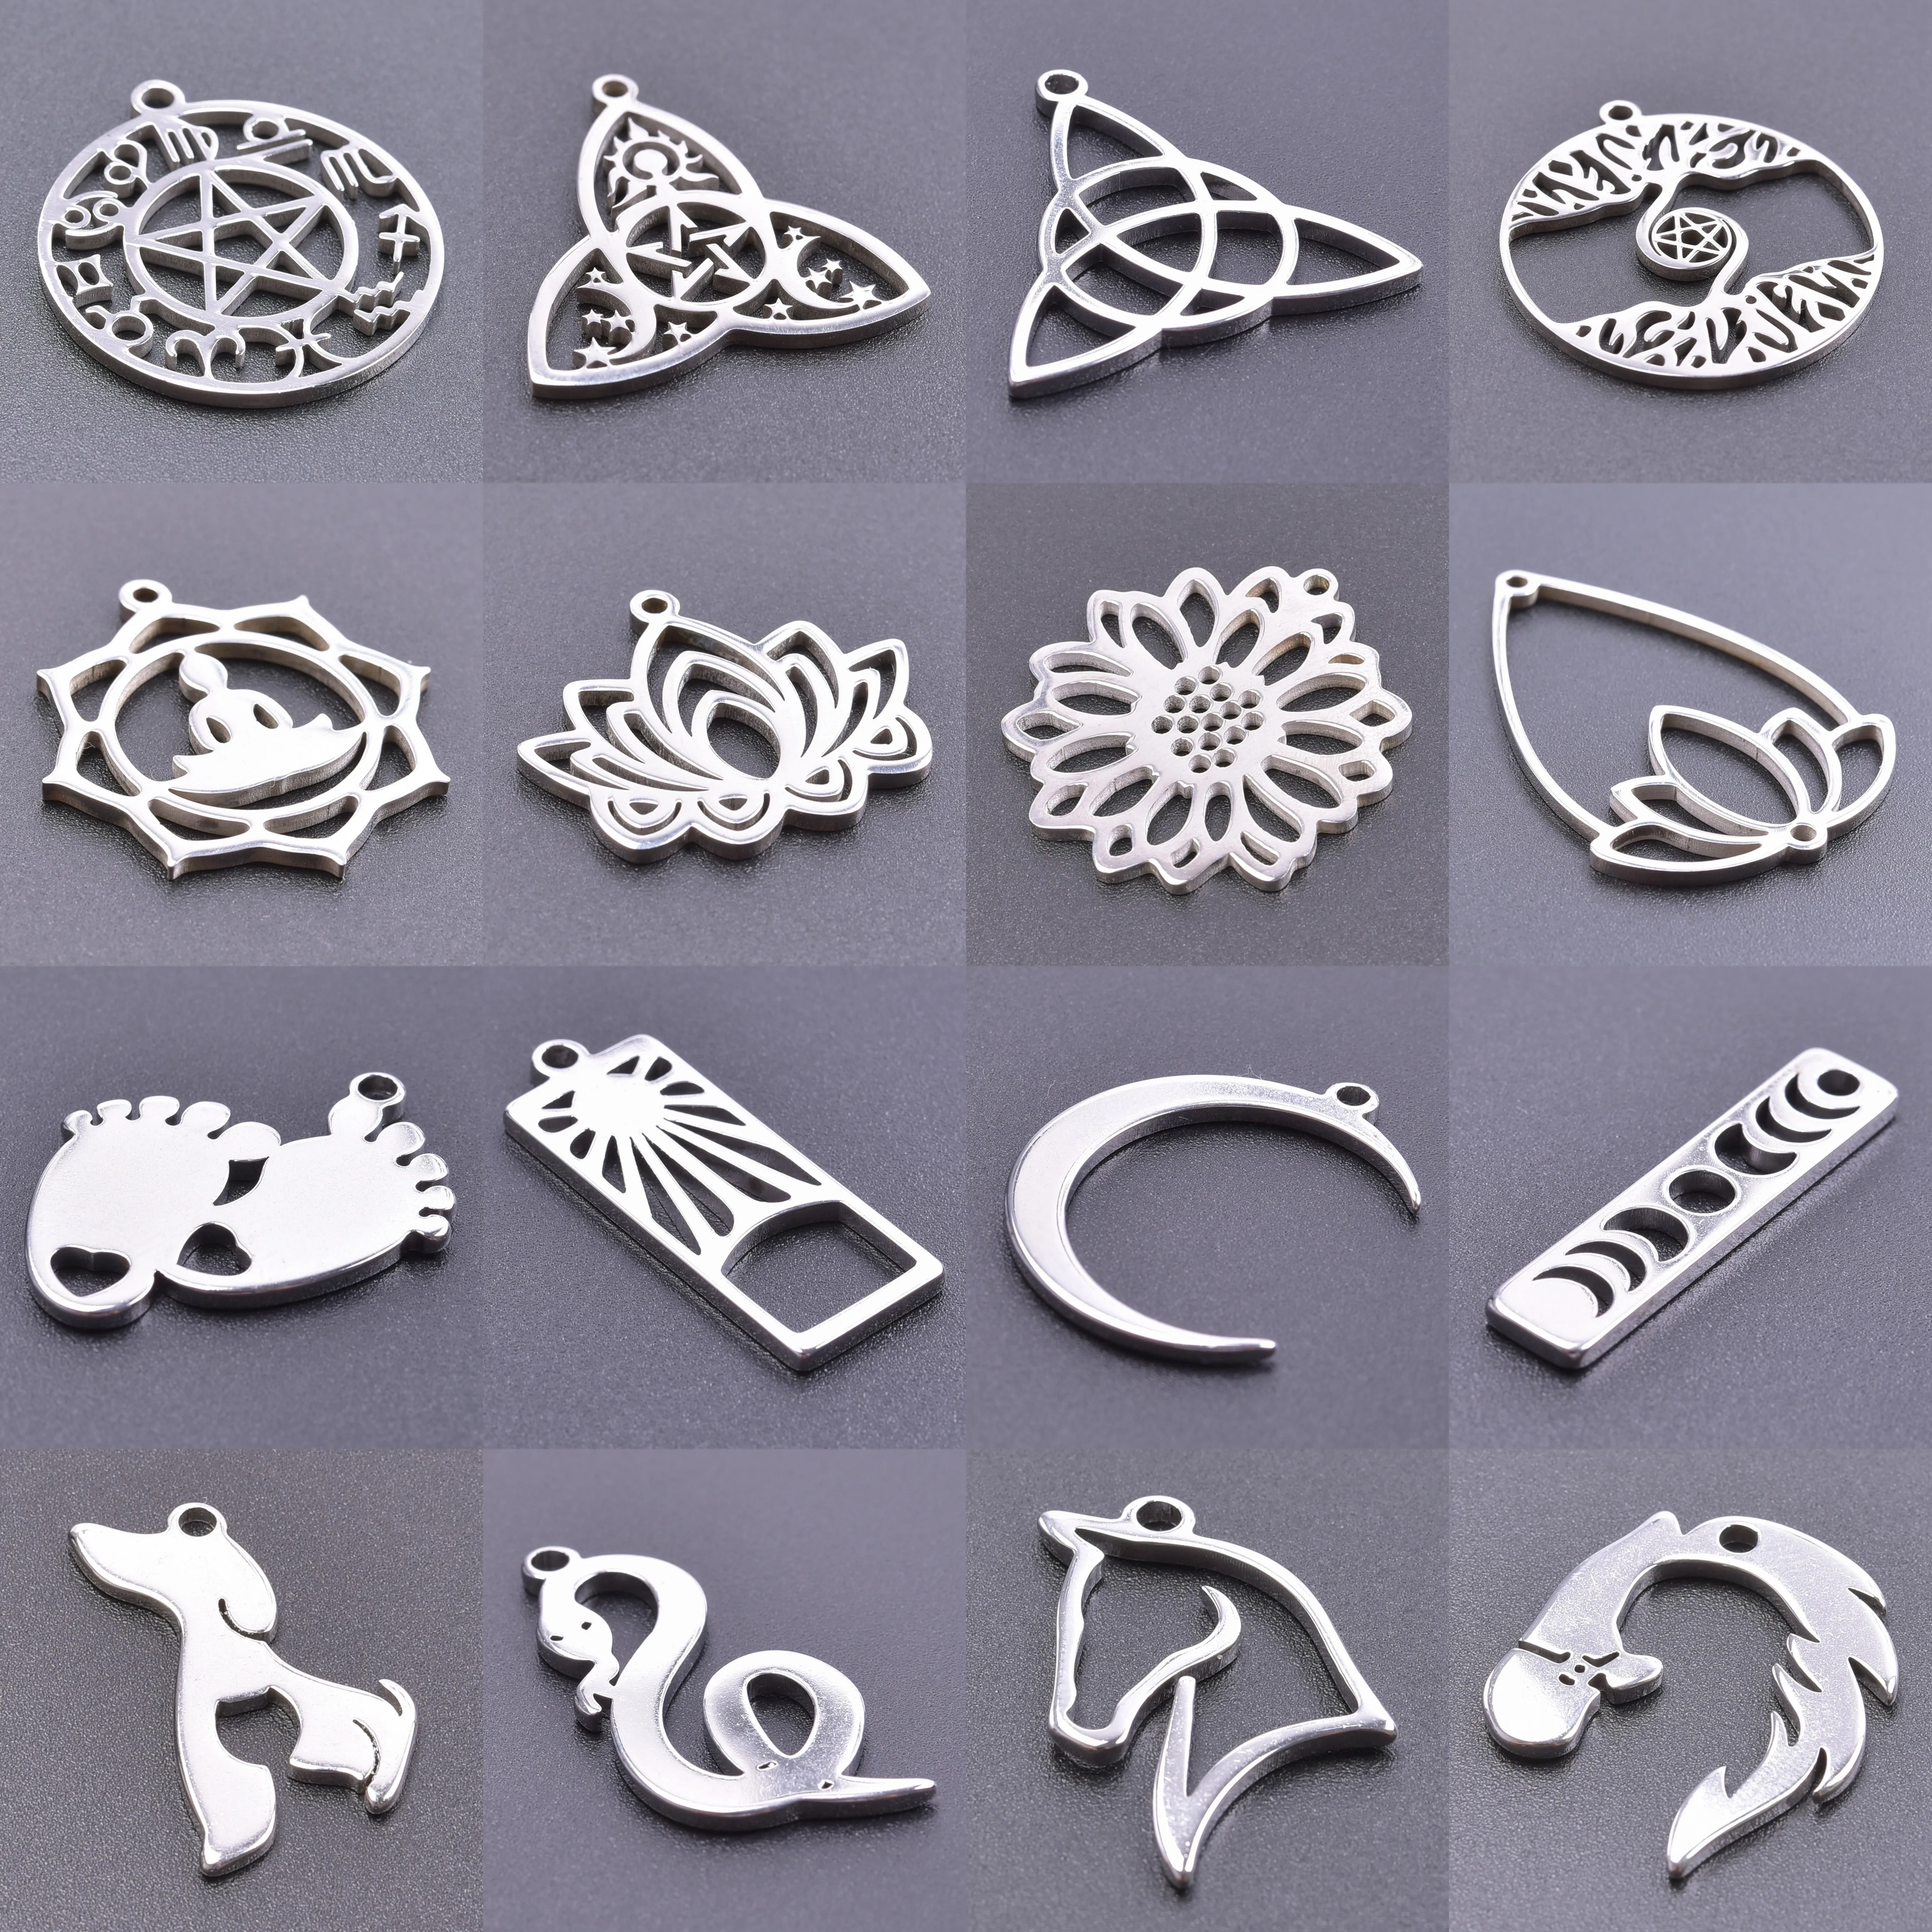 6pcs Stainless Steel Snake Charm, Tiny Snake Pendant, Earring Charms,  Animal Charms, Steel Jewelry Making Supplies, Steel Earring Charms 